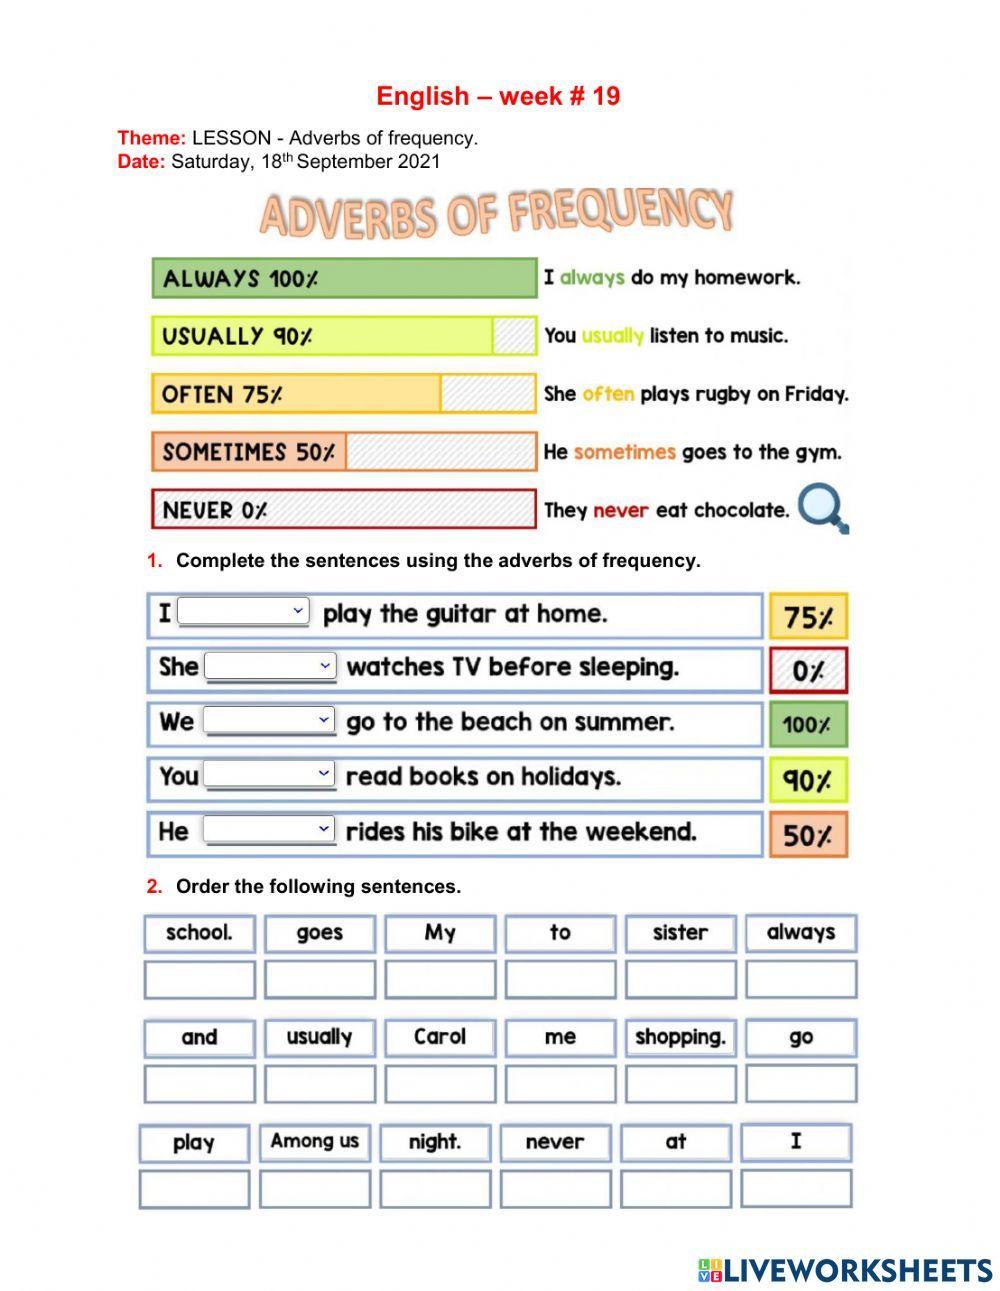 Lesson - Adverbs of Frequency